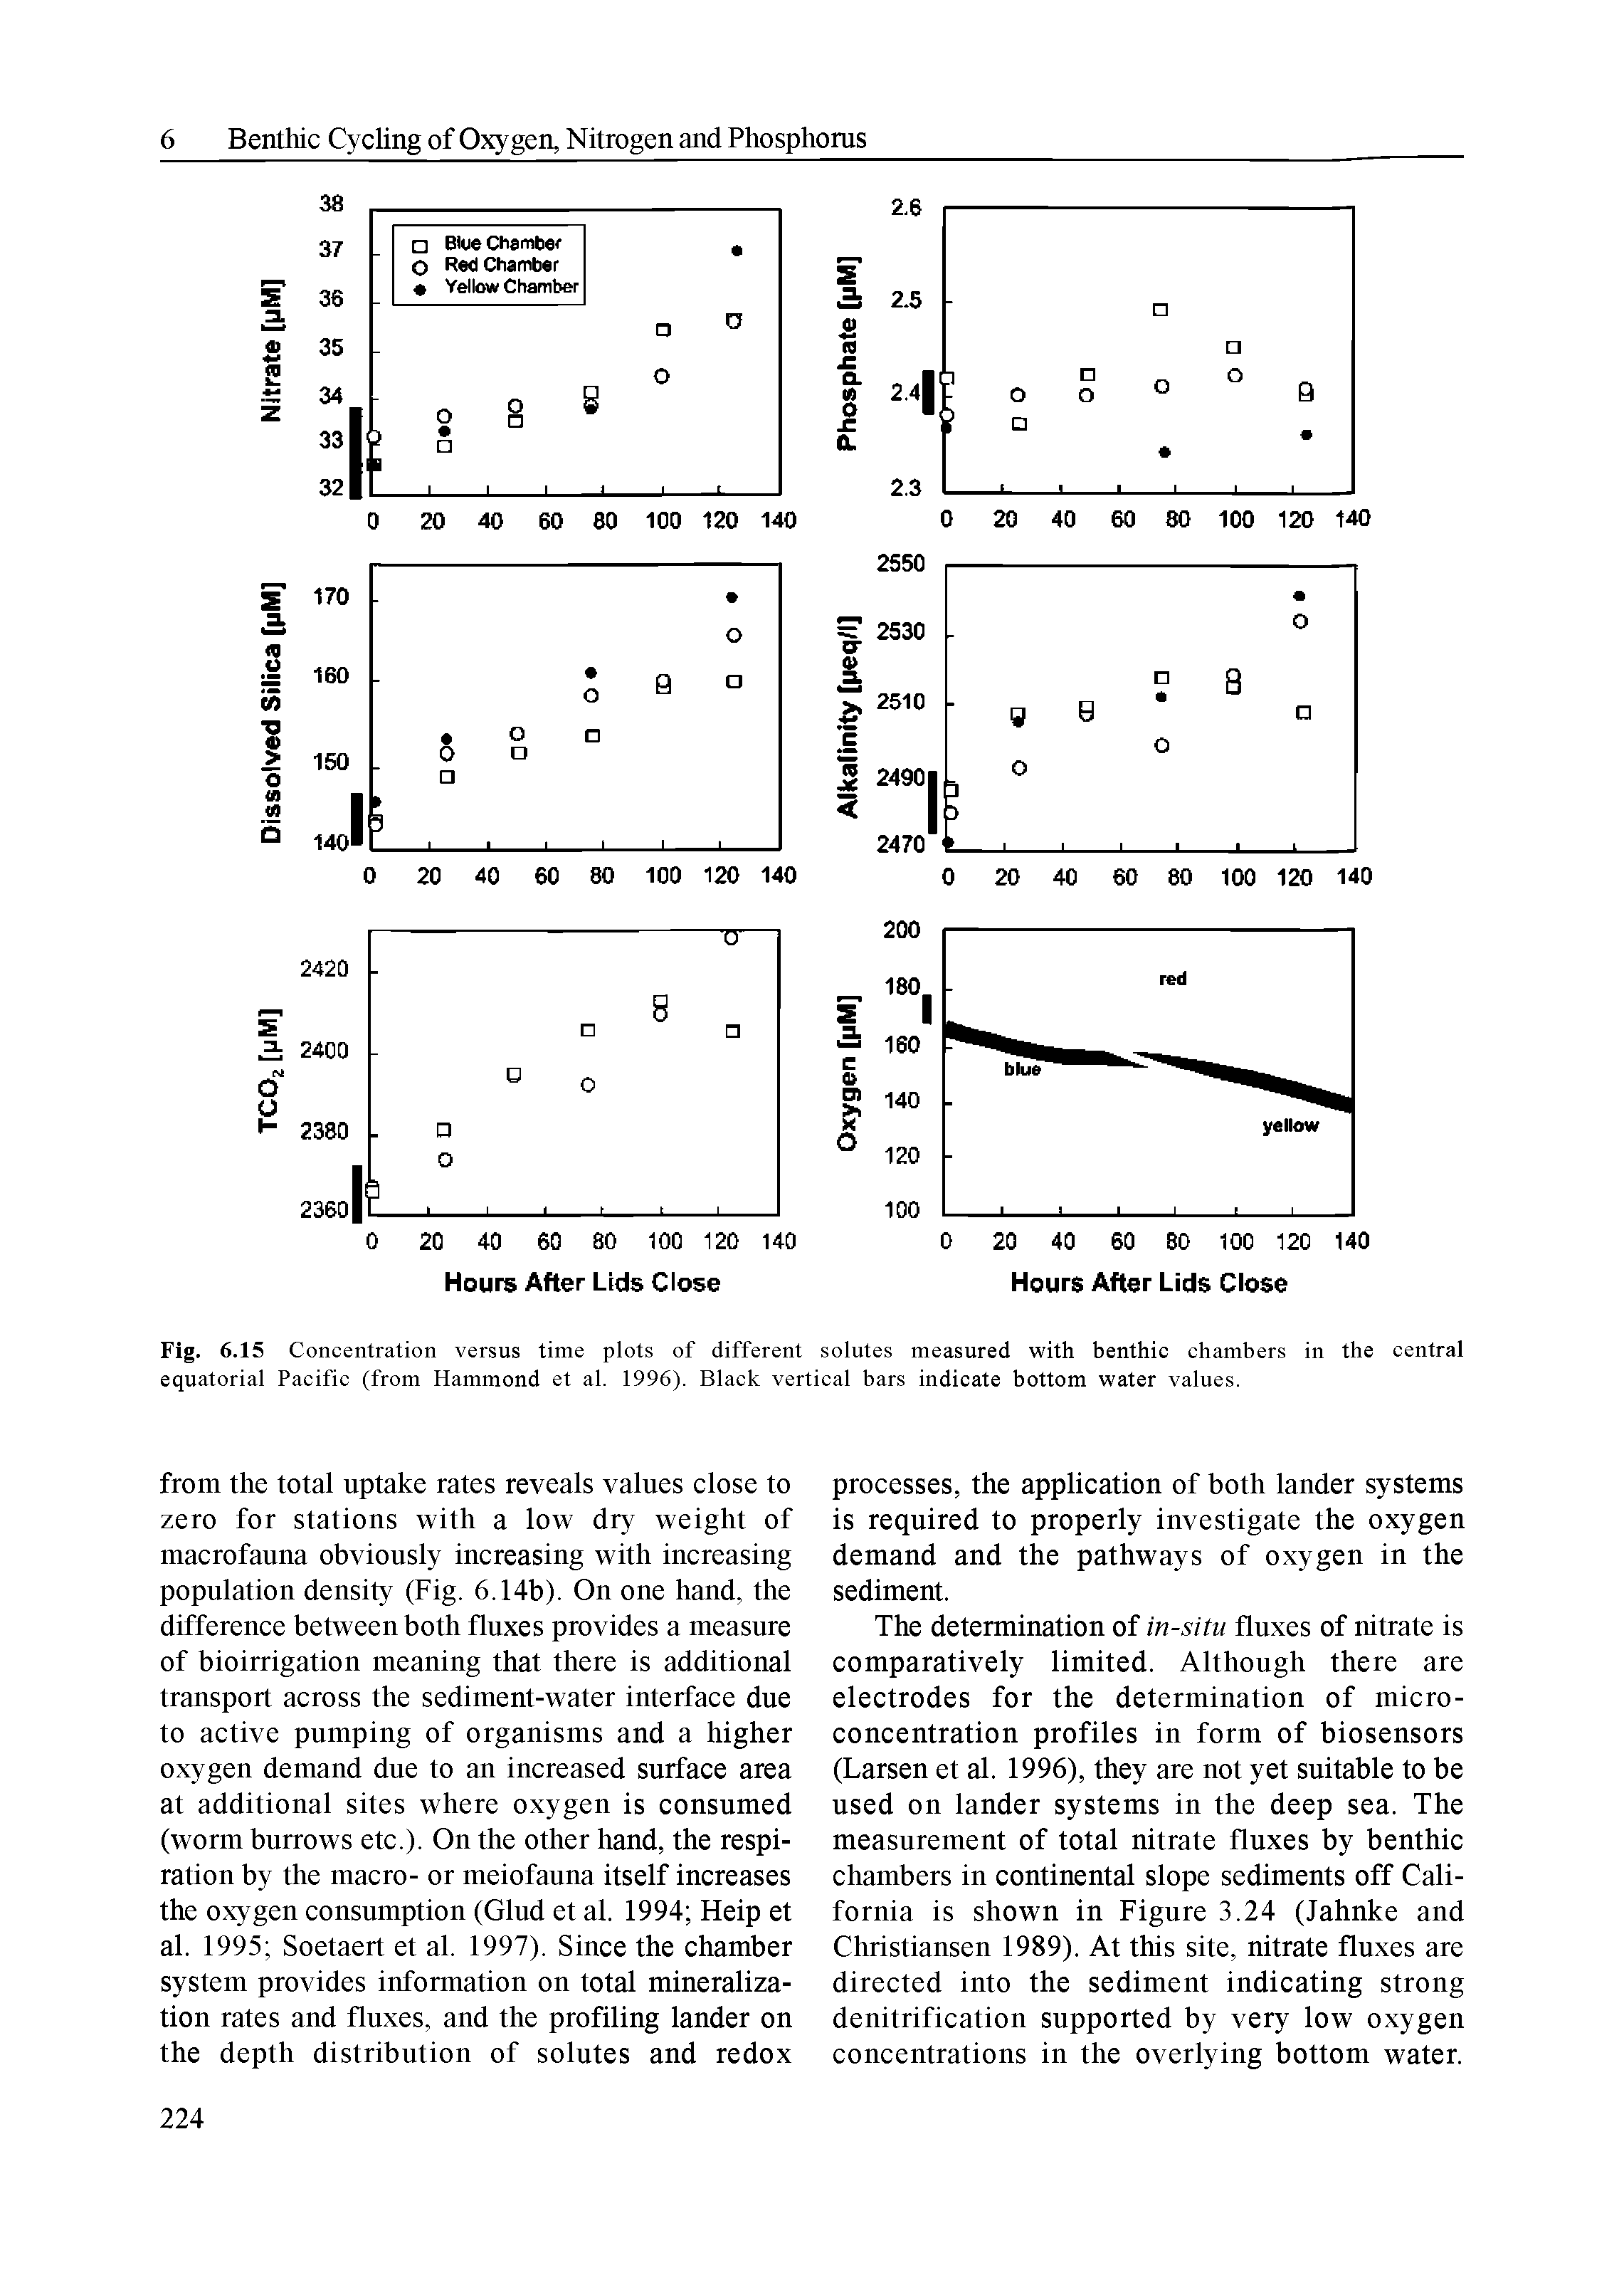 Fig. 6.15 Concentration versus time plots of different solutes measured with benthic chambers in the central equatorial Pacific (from Hammond et al. 1996). Black vertical bars indicate bottom water values.